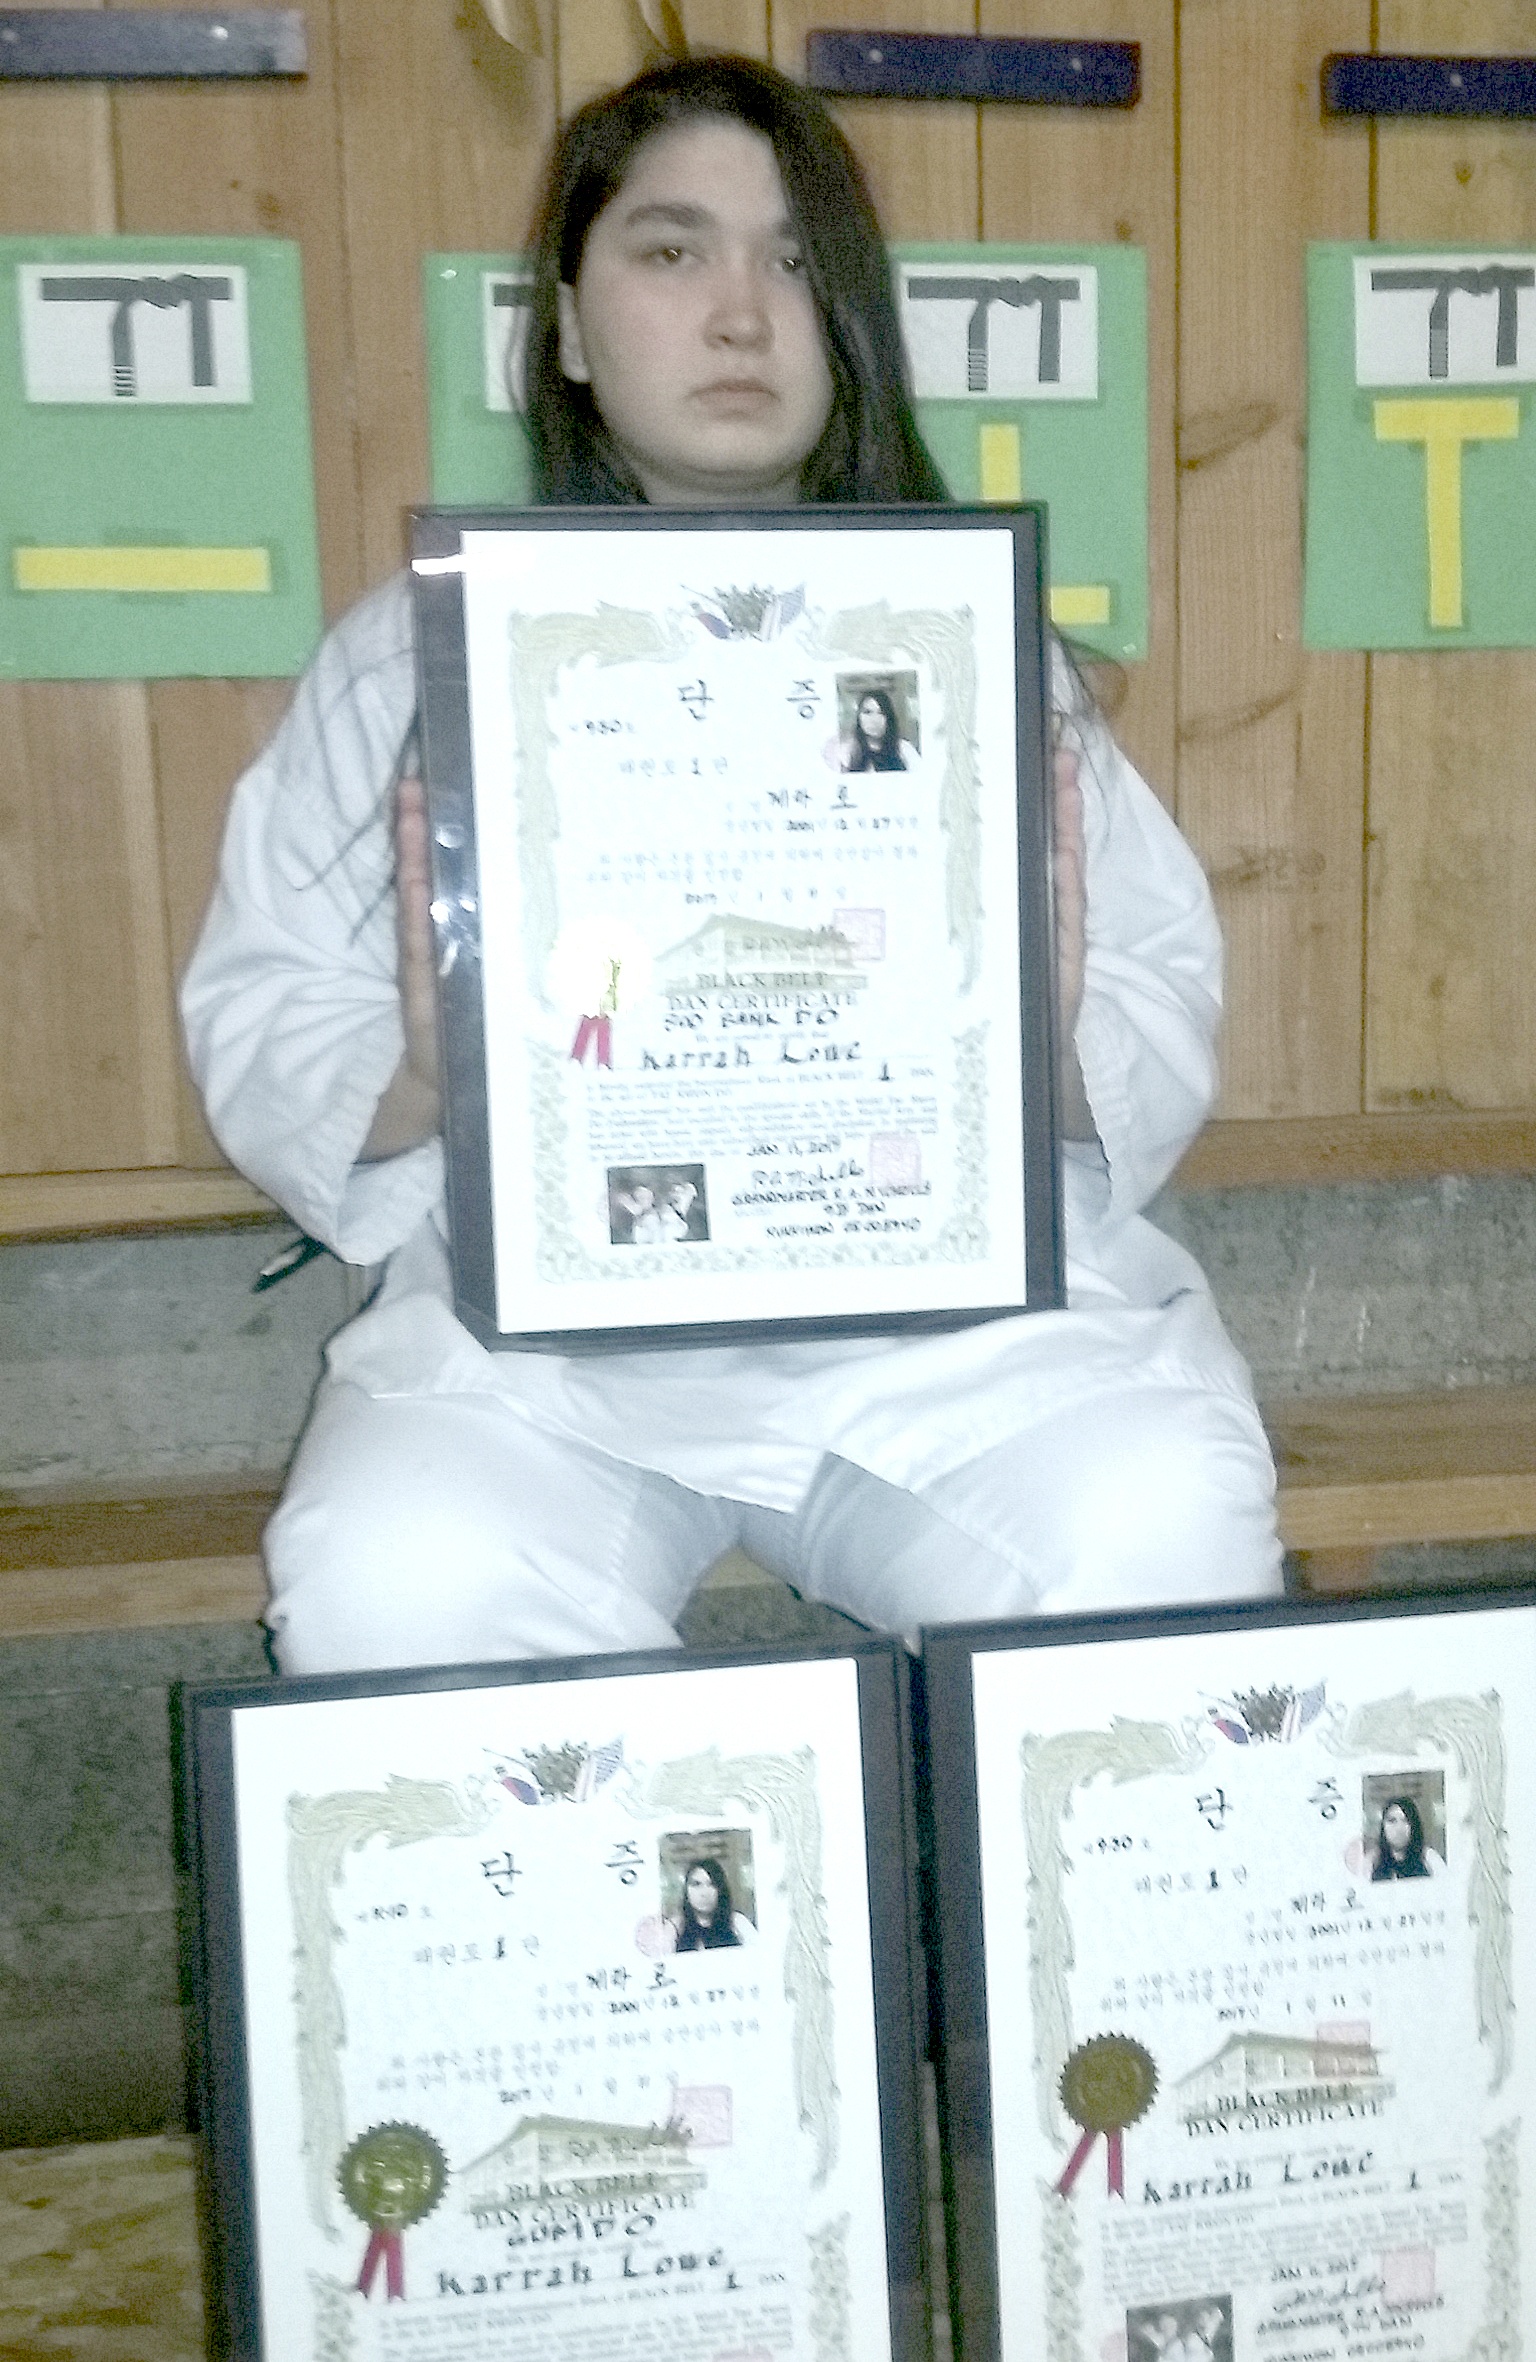 Port Angeles’ Karrah Lowe, age 15, has attained the rank of black belt in three different disciplines.